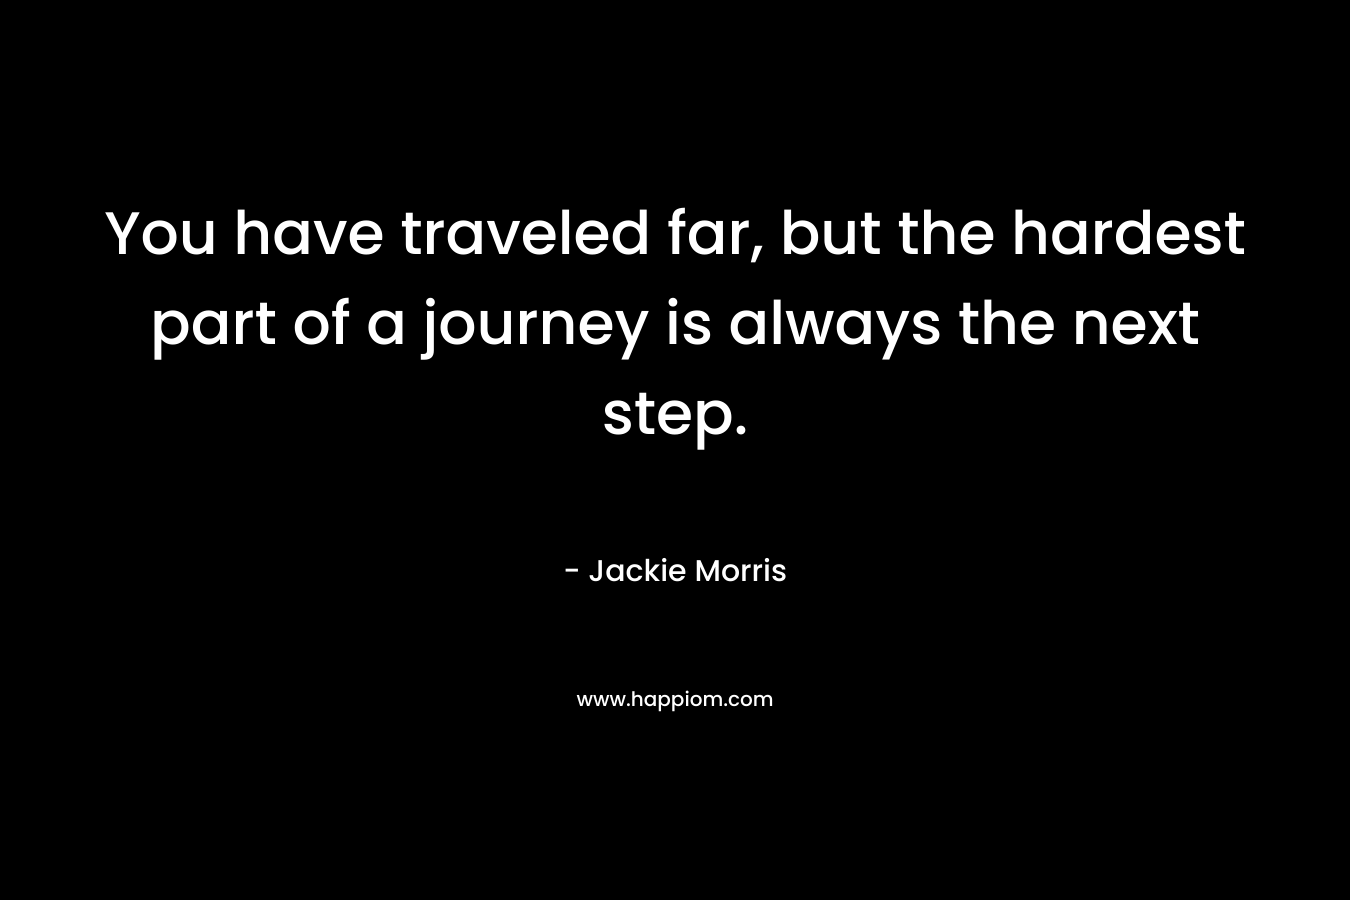 You have traveled far, but the hardest part of a journey is always the next step. – Jackie Morris